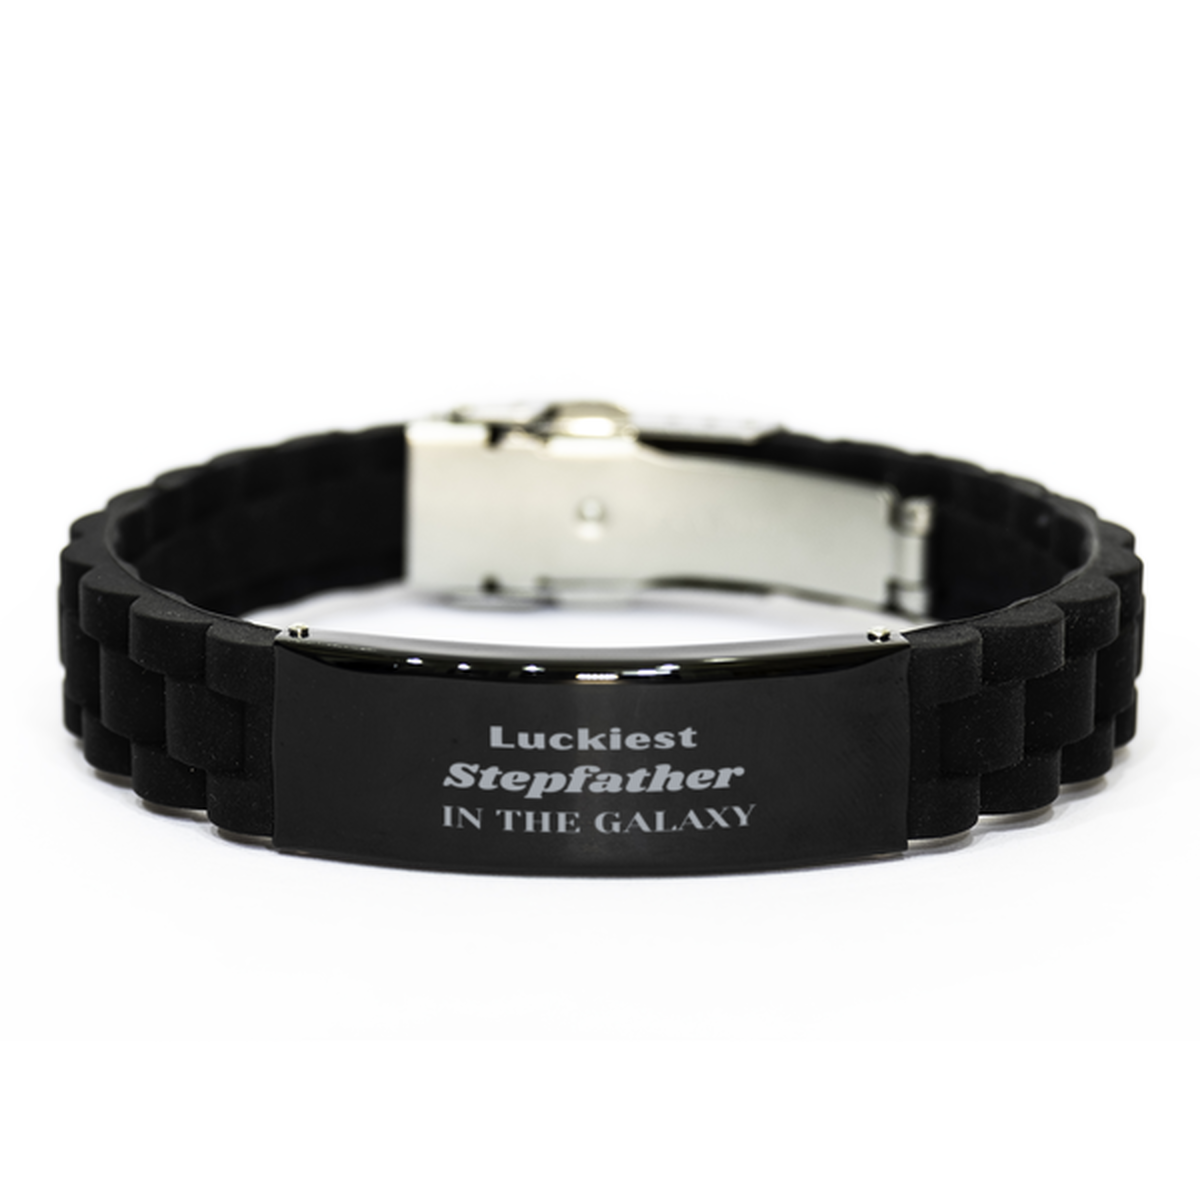 Luckiest Stepfather in the Galaxy, To My Stepfather Engraved Gifts, Christmas Stepfather Black Glidelock Clasp Bracelet Gifts, X-mas Birthday Unique Gifts For Stepfather Men Women